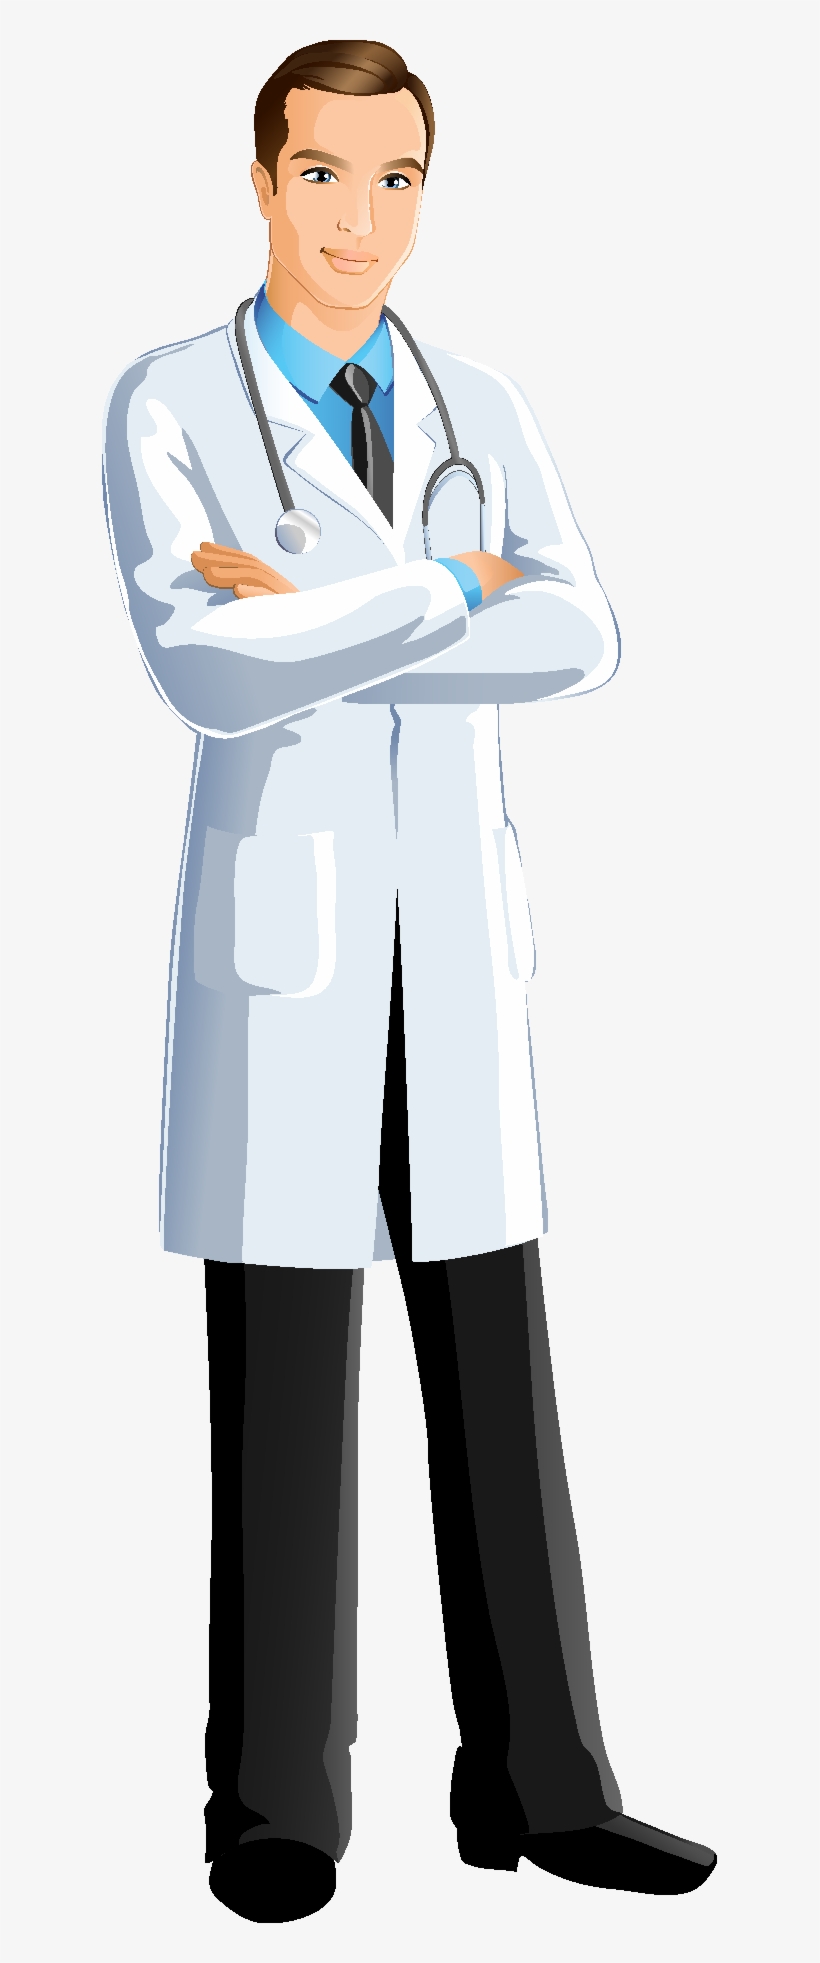 Doctor Vector Eps Free Download, Logo, Icons, Clipart - Doctor Vector, transparent png #5969546